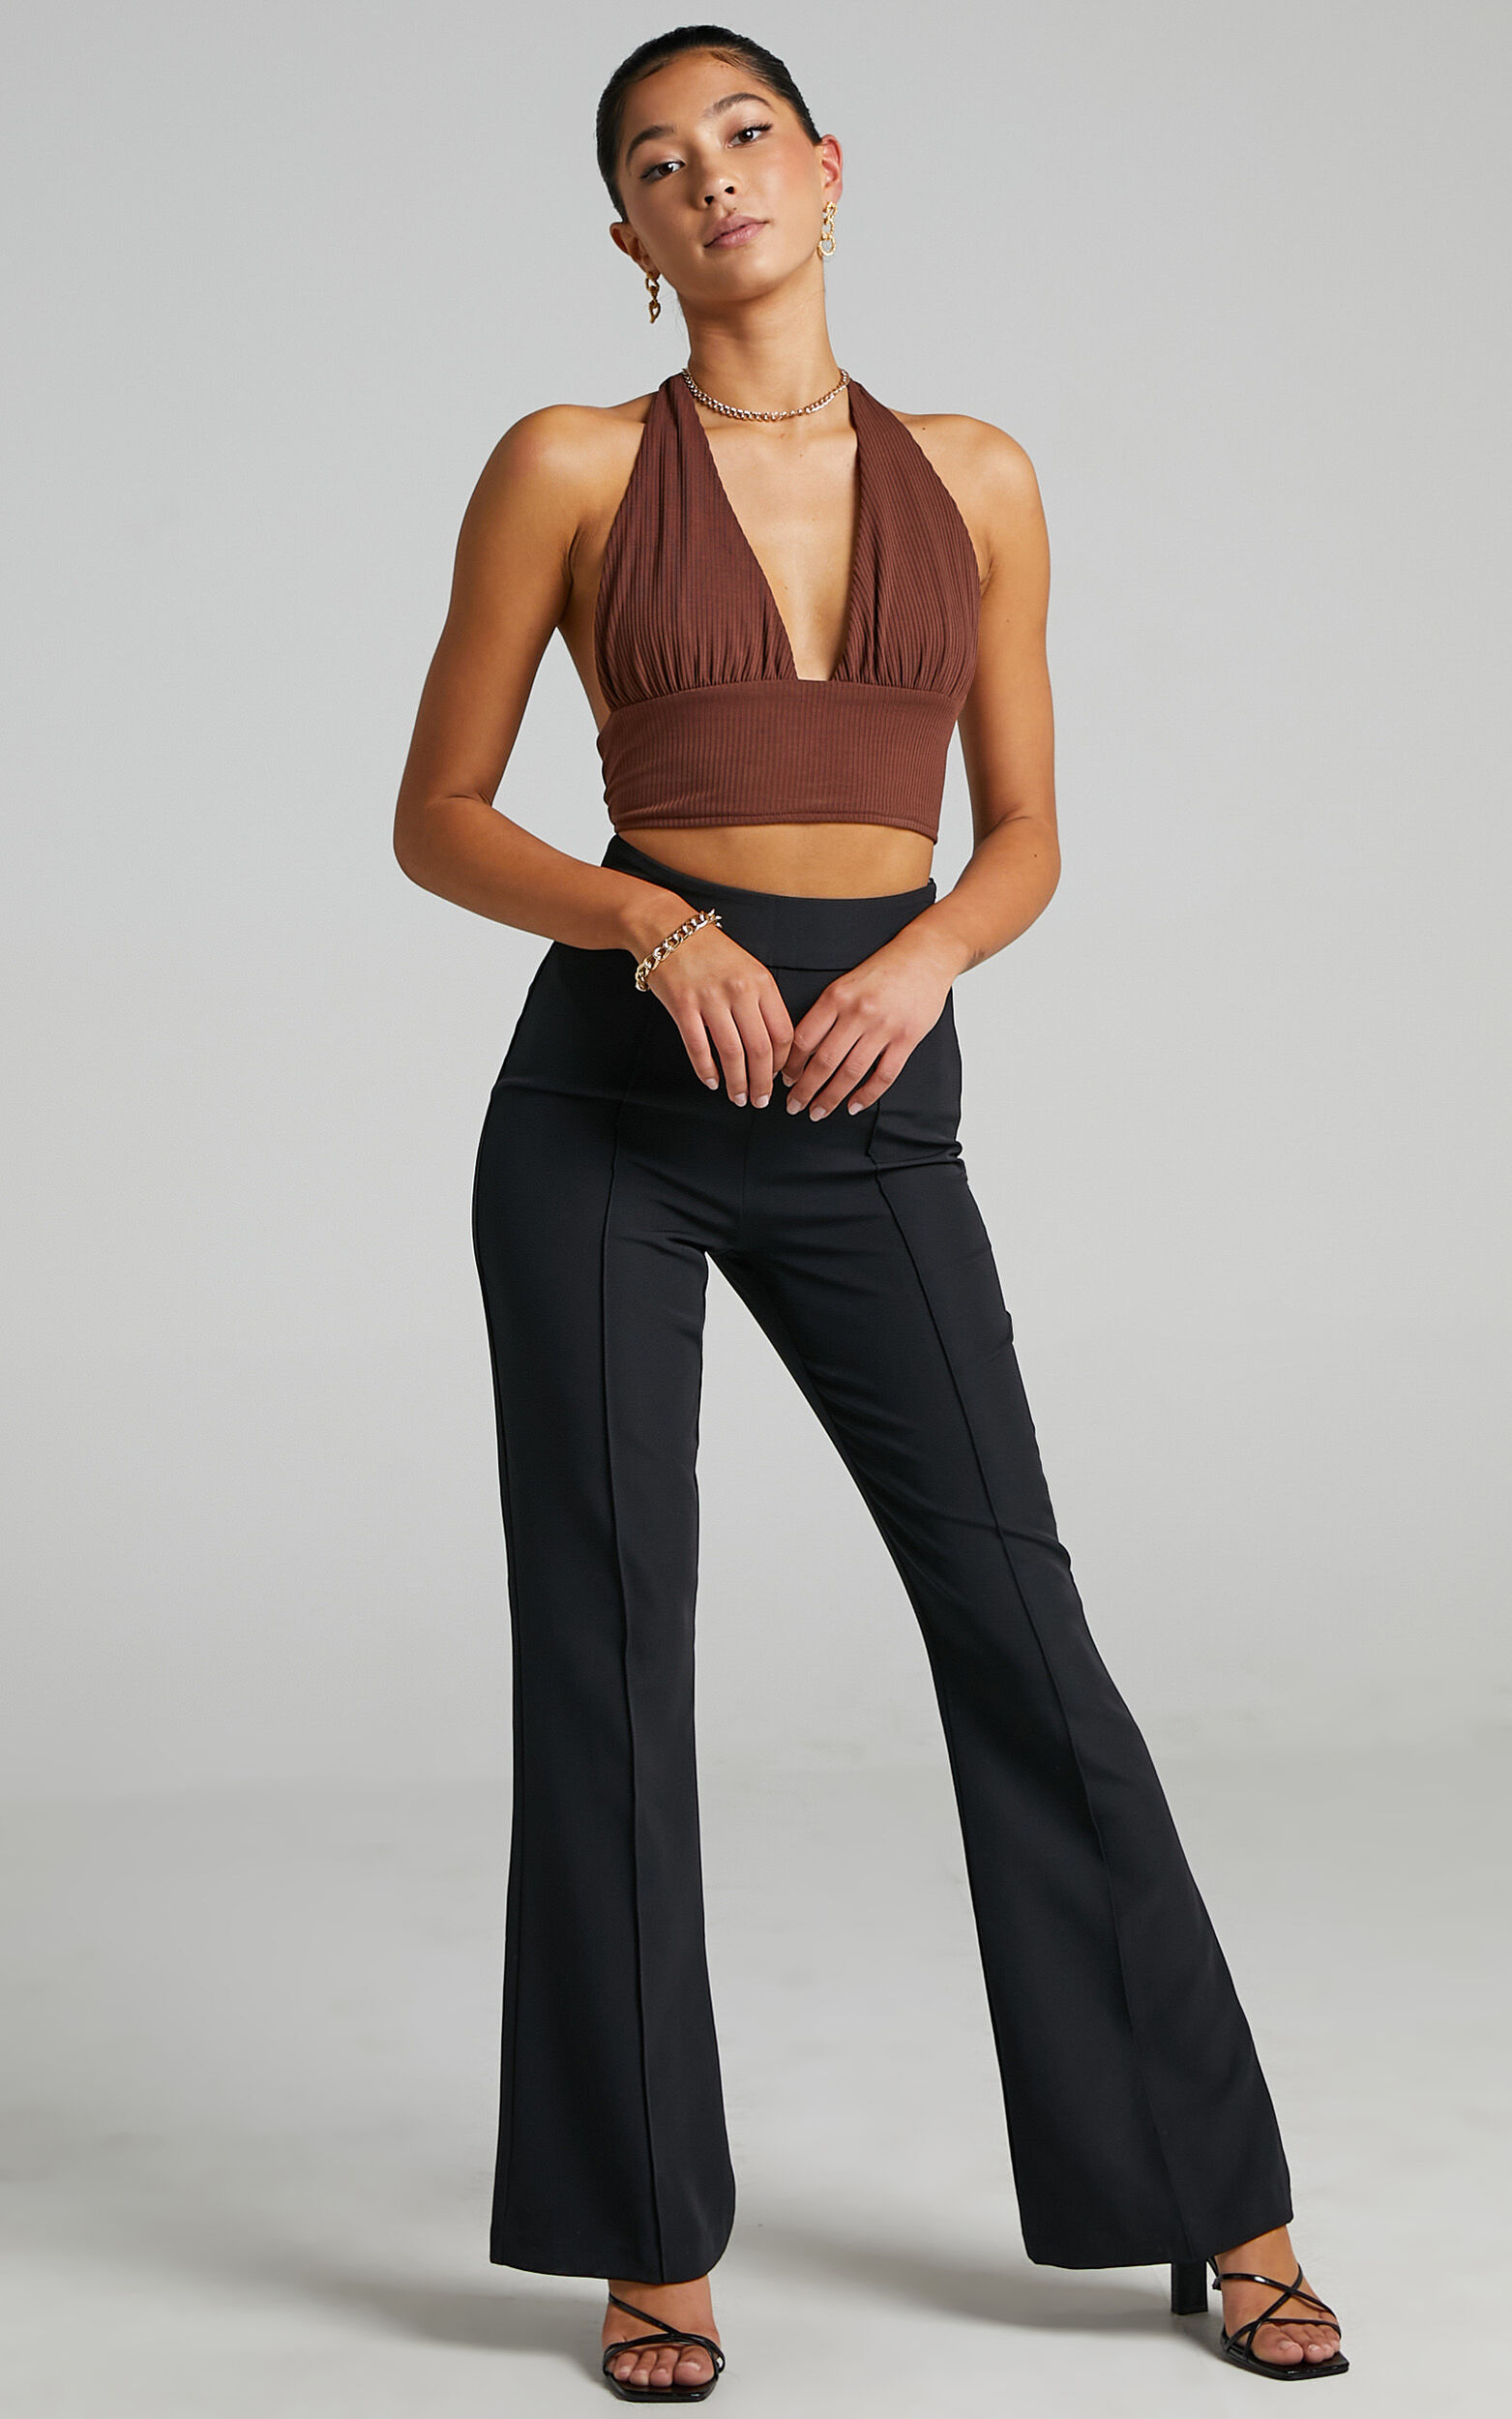 Roschel Pants - High Waisted Flared Pants in Black - 06, BLK1